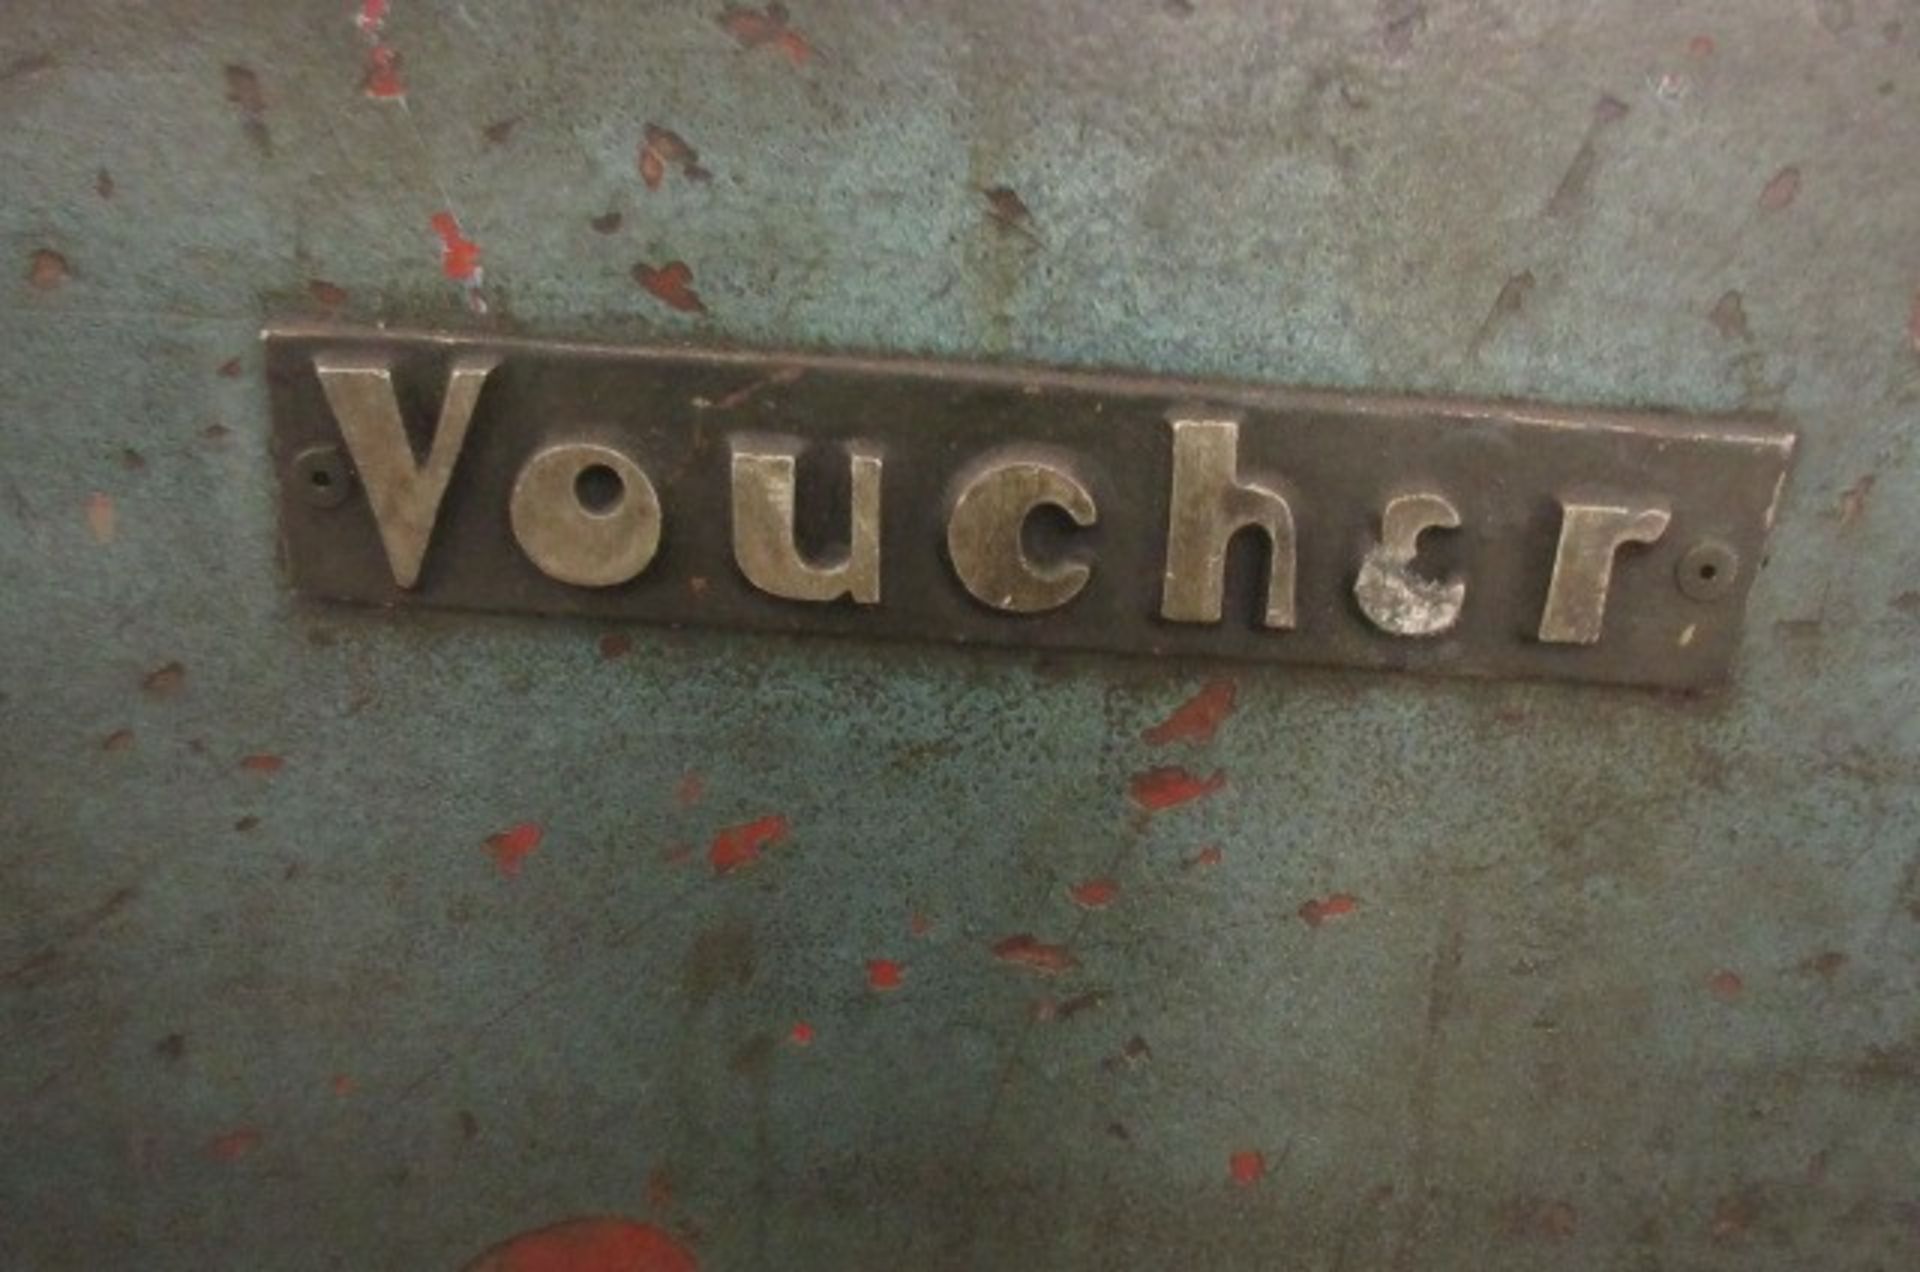 Voucher cut-off saw. Not Installed - Image 2 of 3